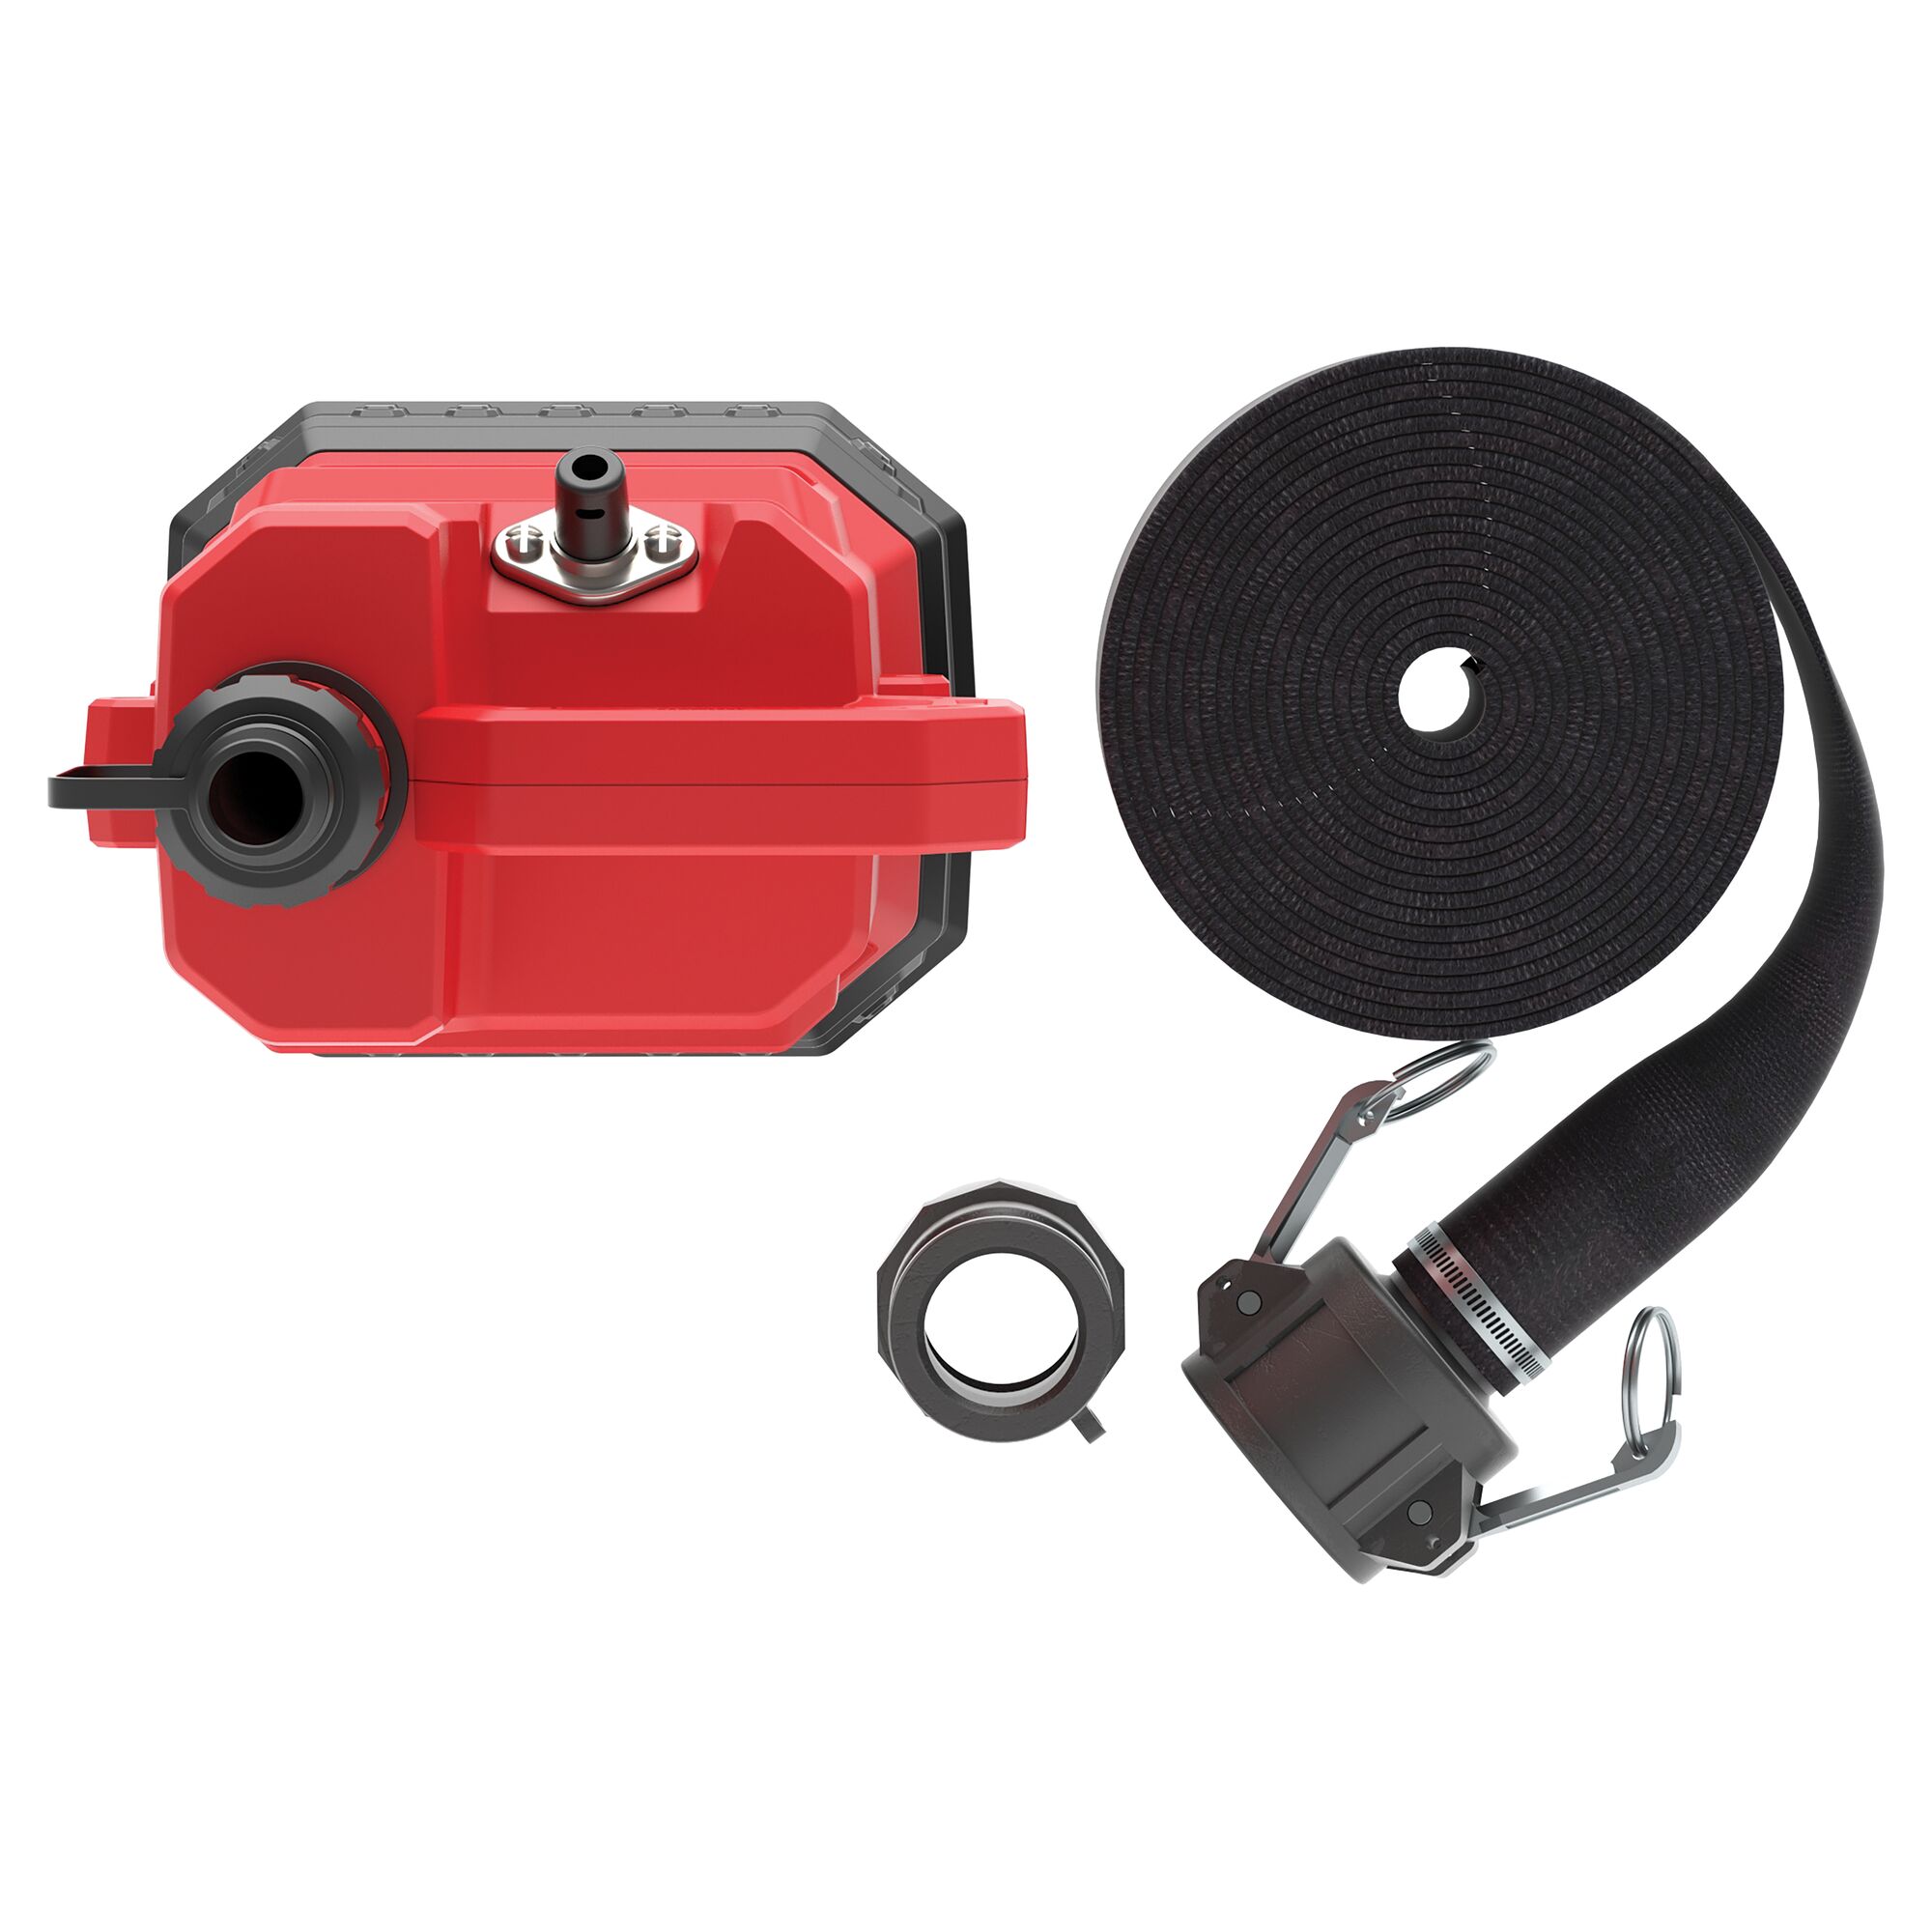 1-3HP WATER/UTILITY PUMP REINFORCED THERMOPLASTIC SUBMERSIBLE WITH PVC LAYFLAT HOSE KIT AND ADAPTERS TOP VIEW